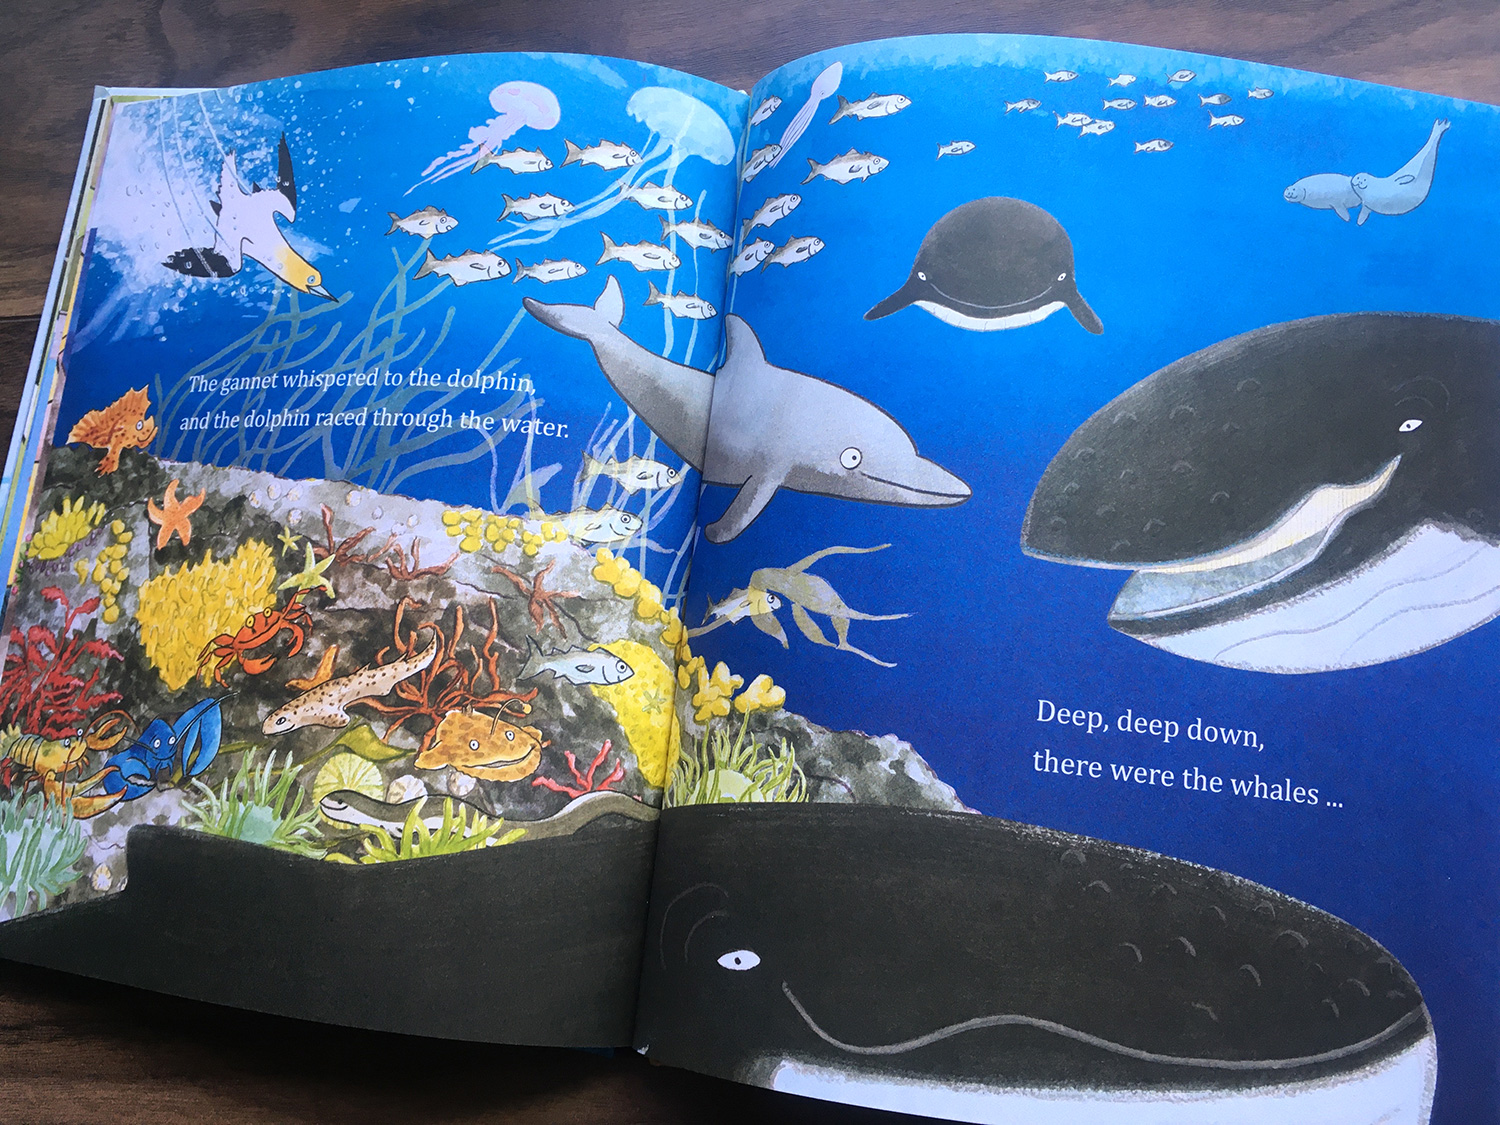 Where Are You Puffling? underwater scene with a gannet, dolphin, whales and more sea life